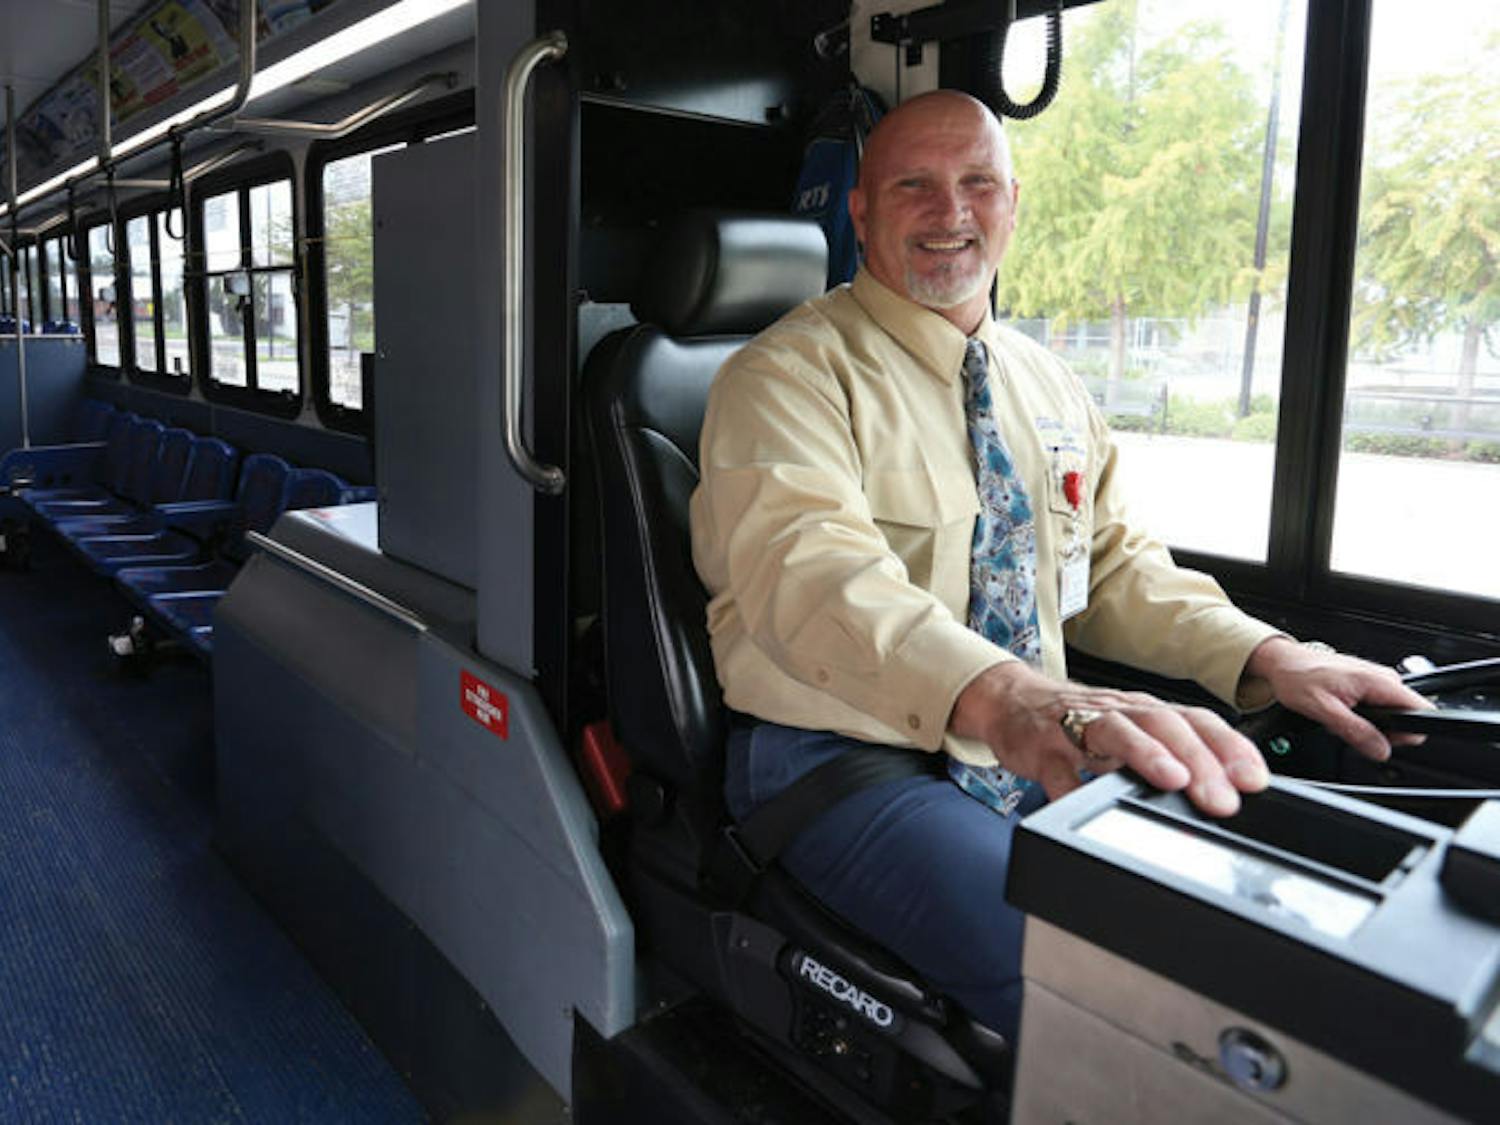 RTS driver Steve Holloway, 54, is well-liked by students and bus riders for the jokes and life lessons he shares during his Friday routes. Holloway’s passion for customer service won him RTS’s top award for customer service earlier this year. He currently drives a bus on Route 35.